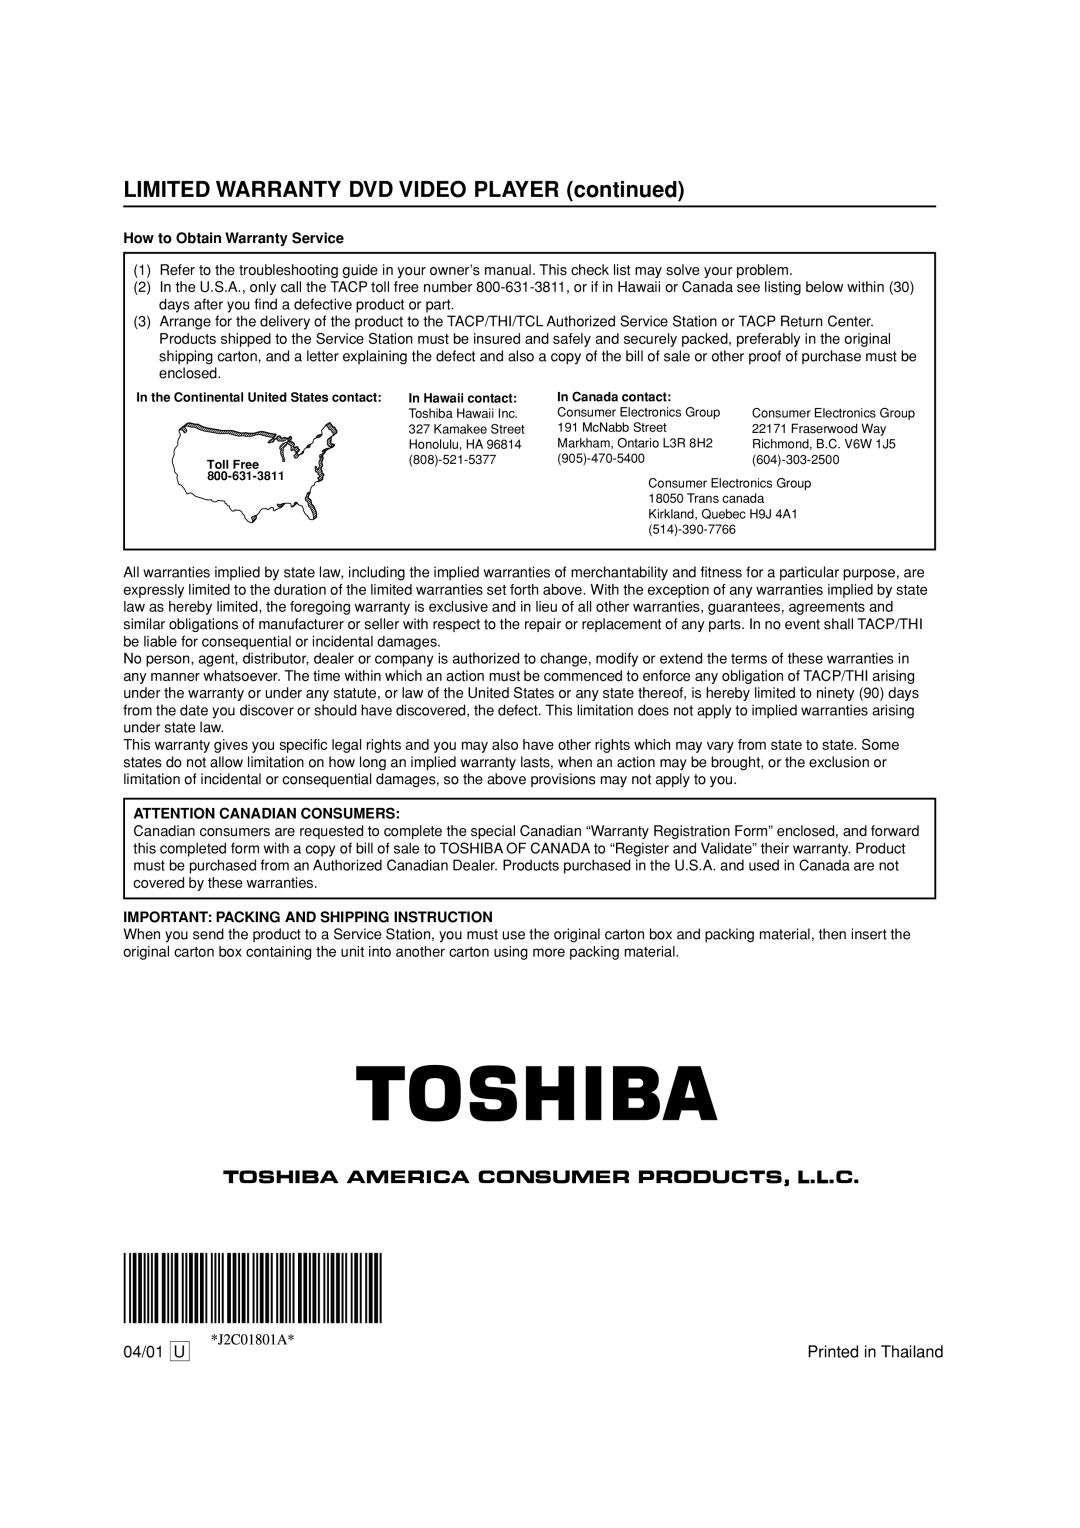 Toshiba SD-3860SC LIMITED WARRANTY DVD VIDEO PLAYER continued, 04/01 U, Printed in Thailand, Attention Canadian Consumers 